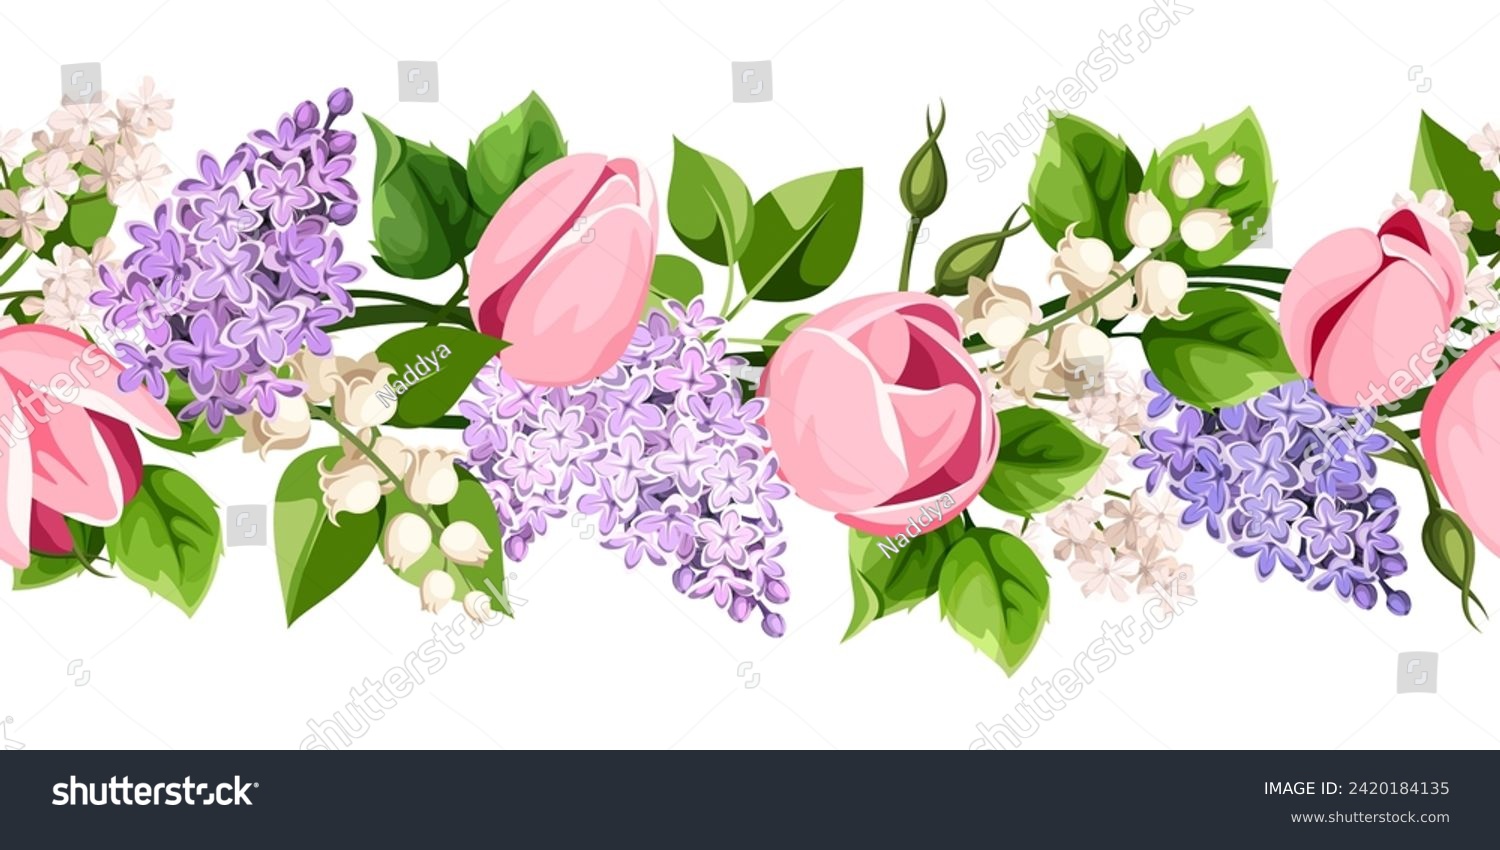 SVG of Horizontal seamless border with pink tulip flowers, purple lilac flowers, lily of the valley flowers, and green leaves. Vector floral garland. Hand-drawn illustration, not AI svg